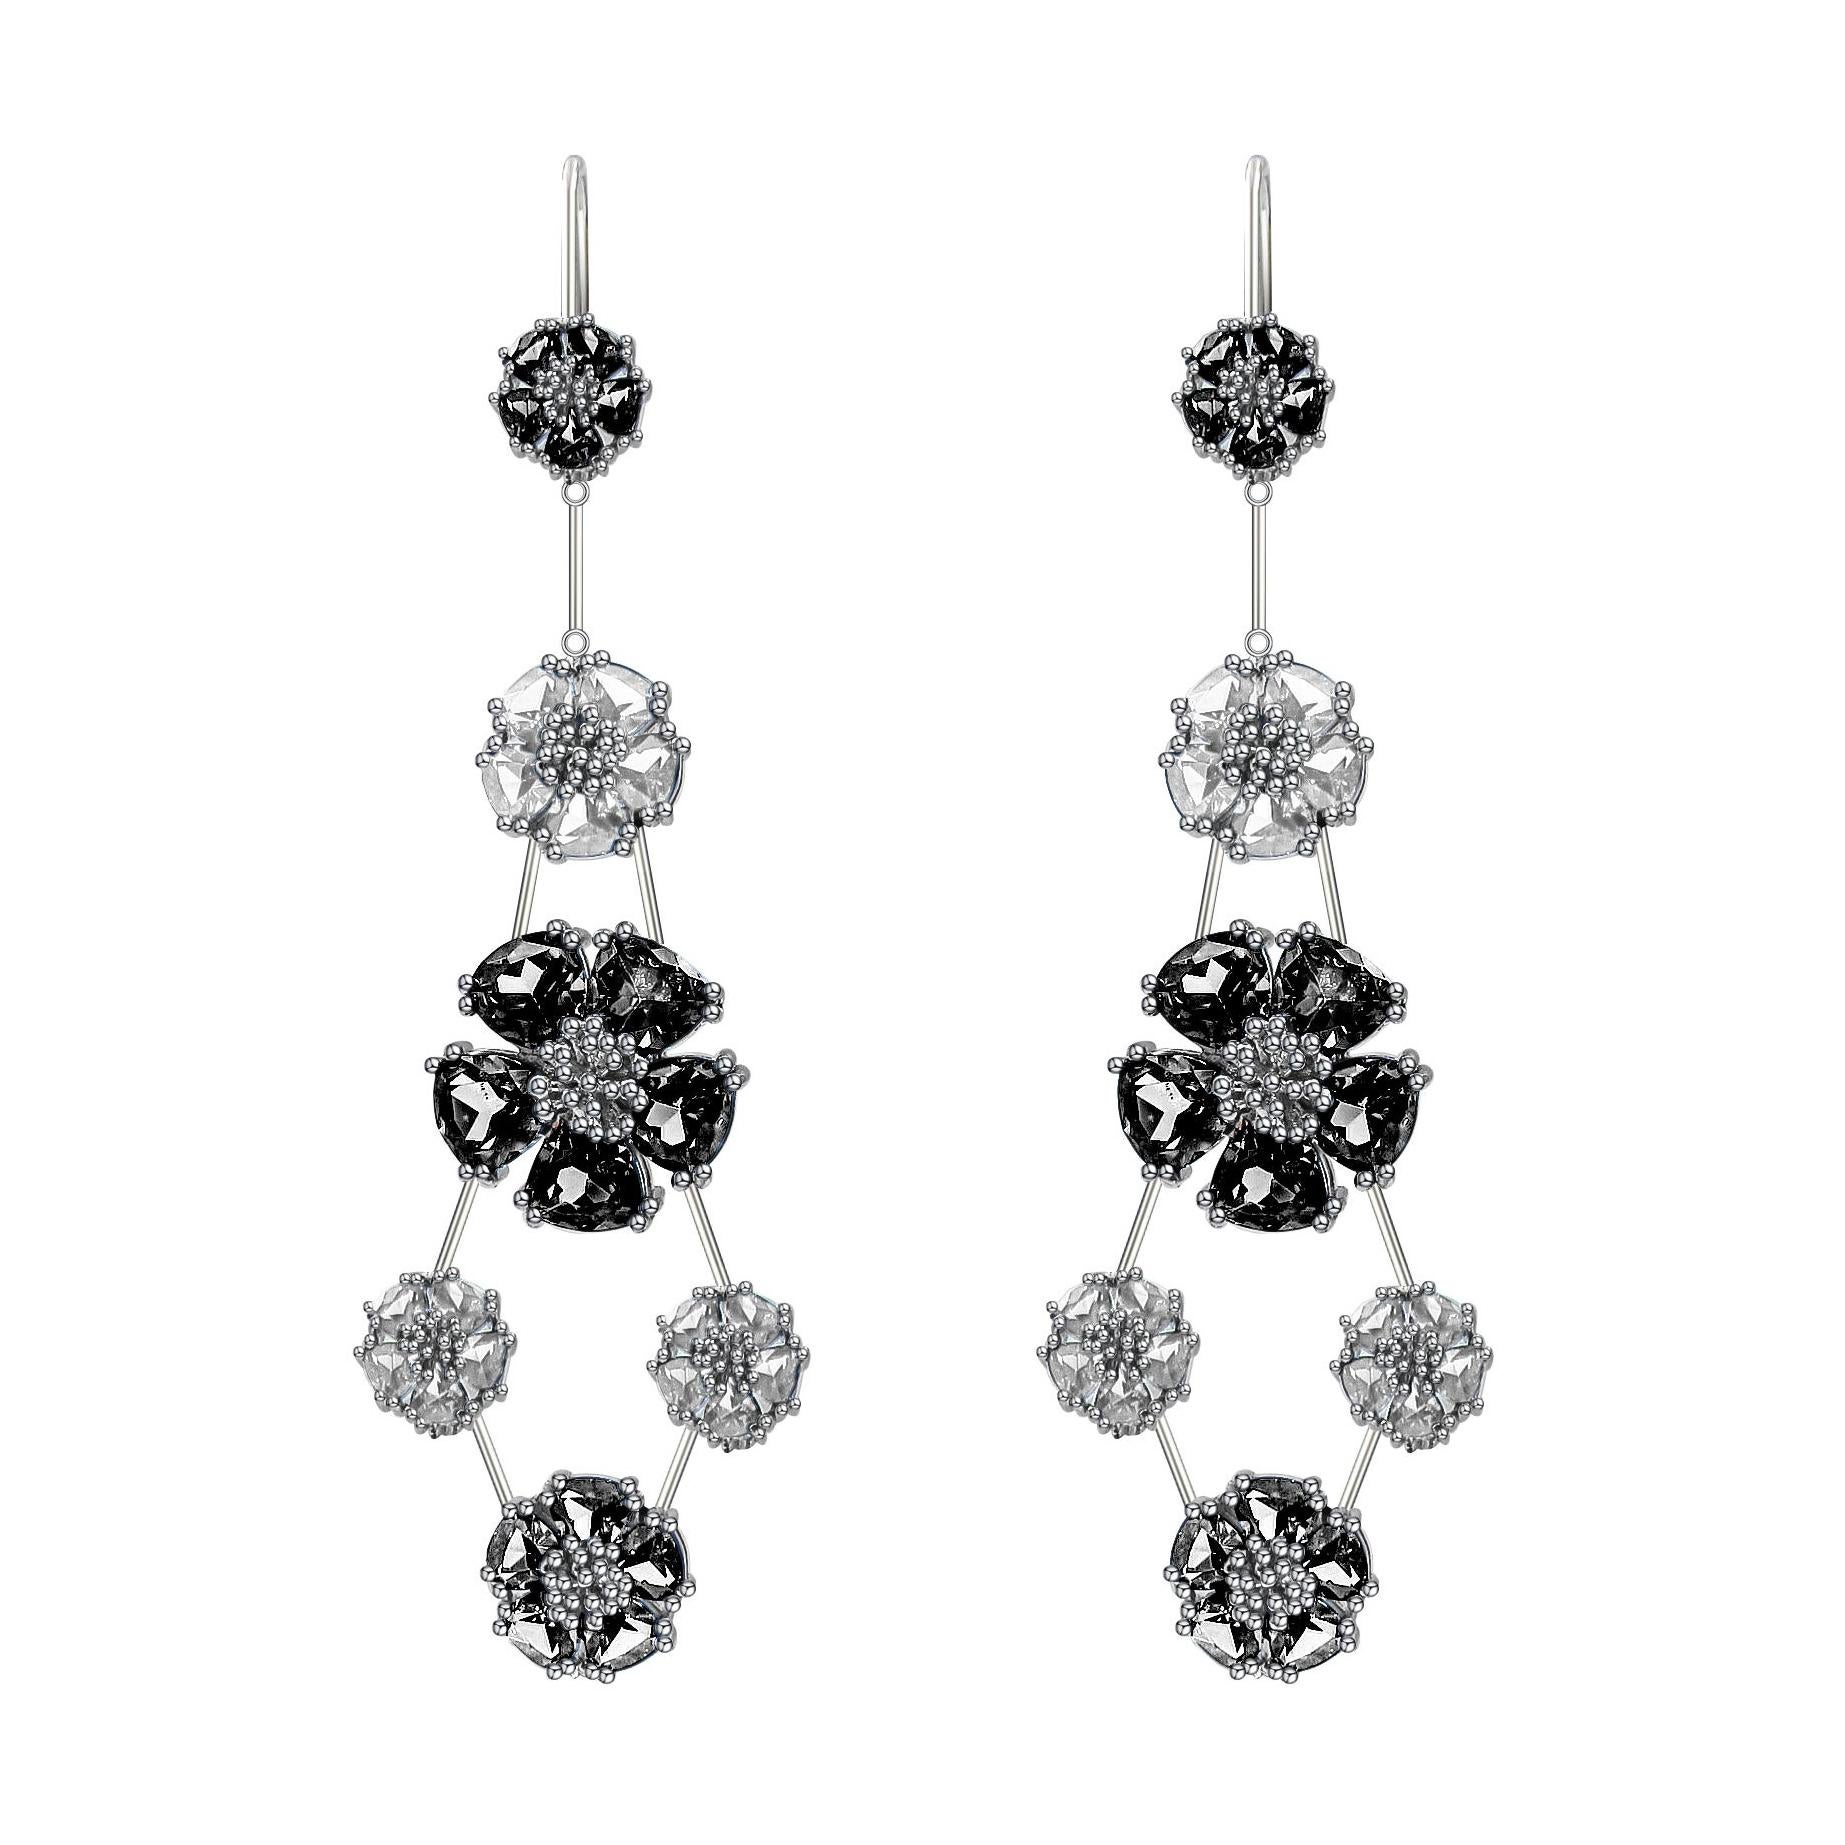 White Topaz and Black Spinel Blossom Double-Tier Chandelier Earrings